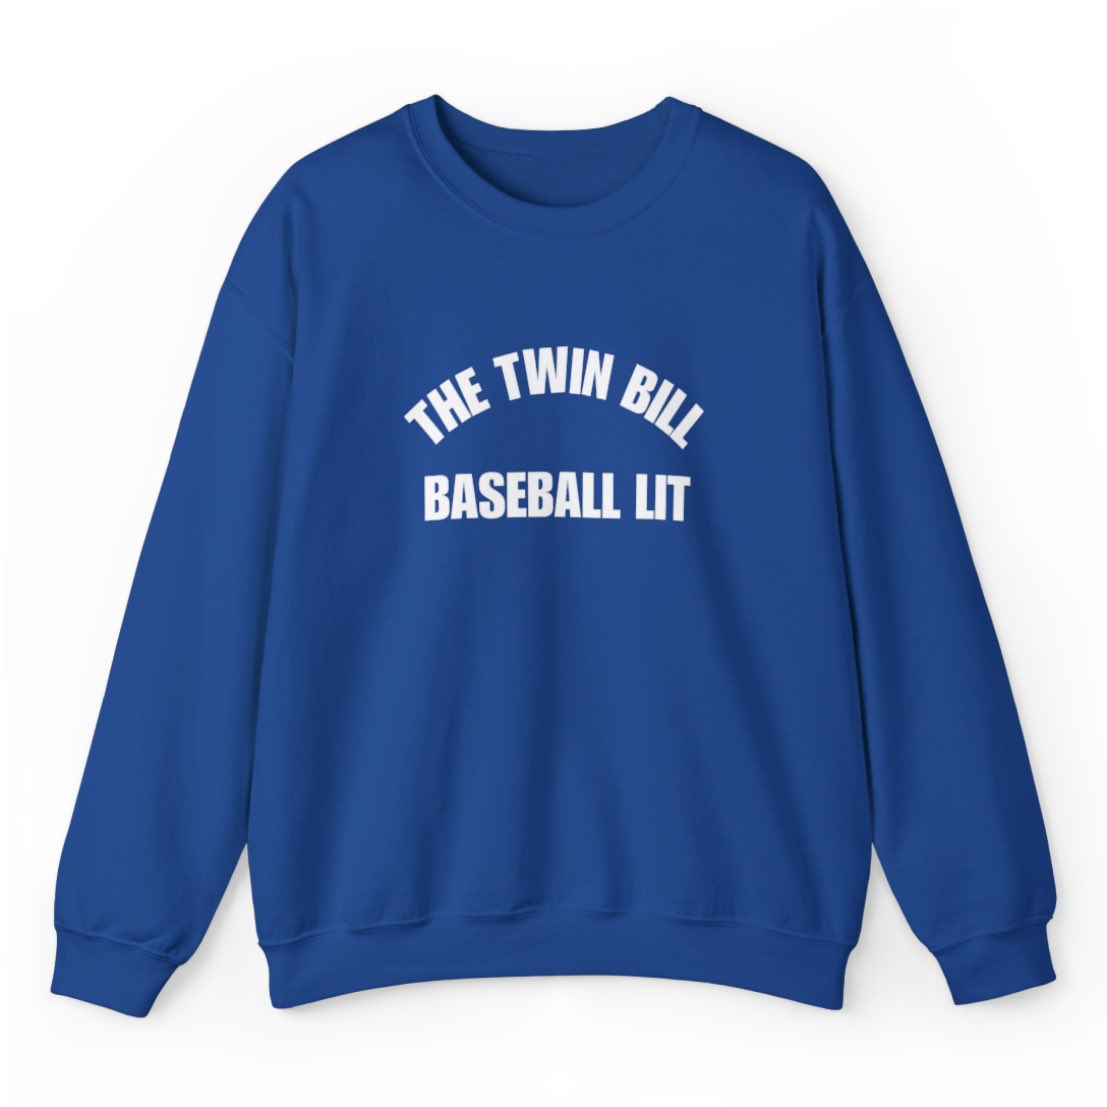 For Cyber Monday we have some new merch in the store, including this sweatshirt. thetwinbill.com/store